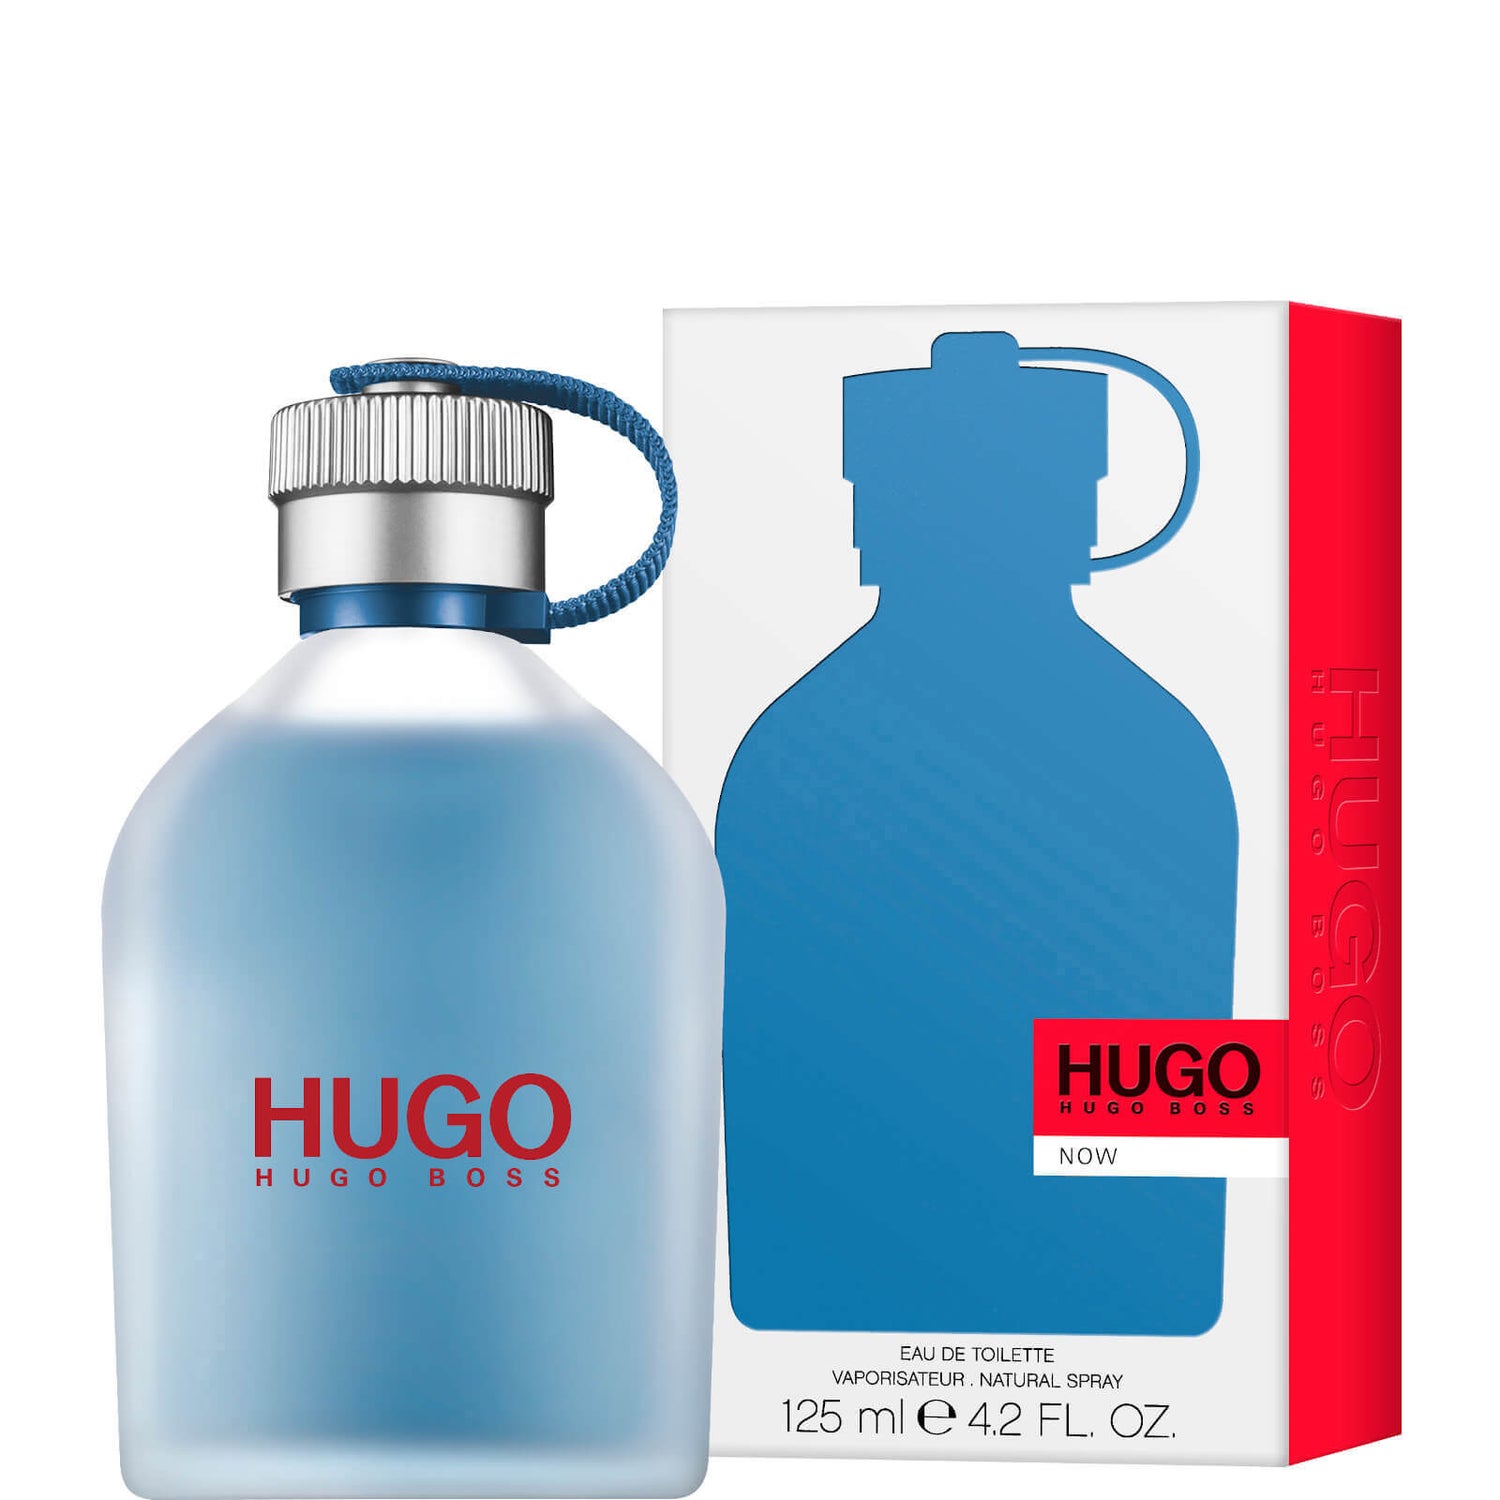 Hugo Boss Cologne Travel Size: The Perfect Companion for Frequent Travelers